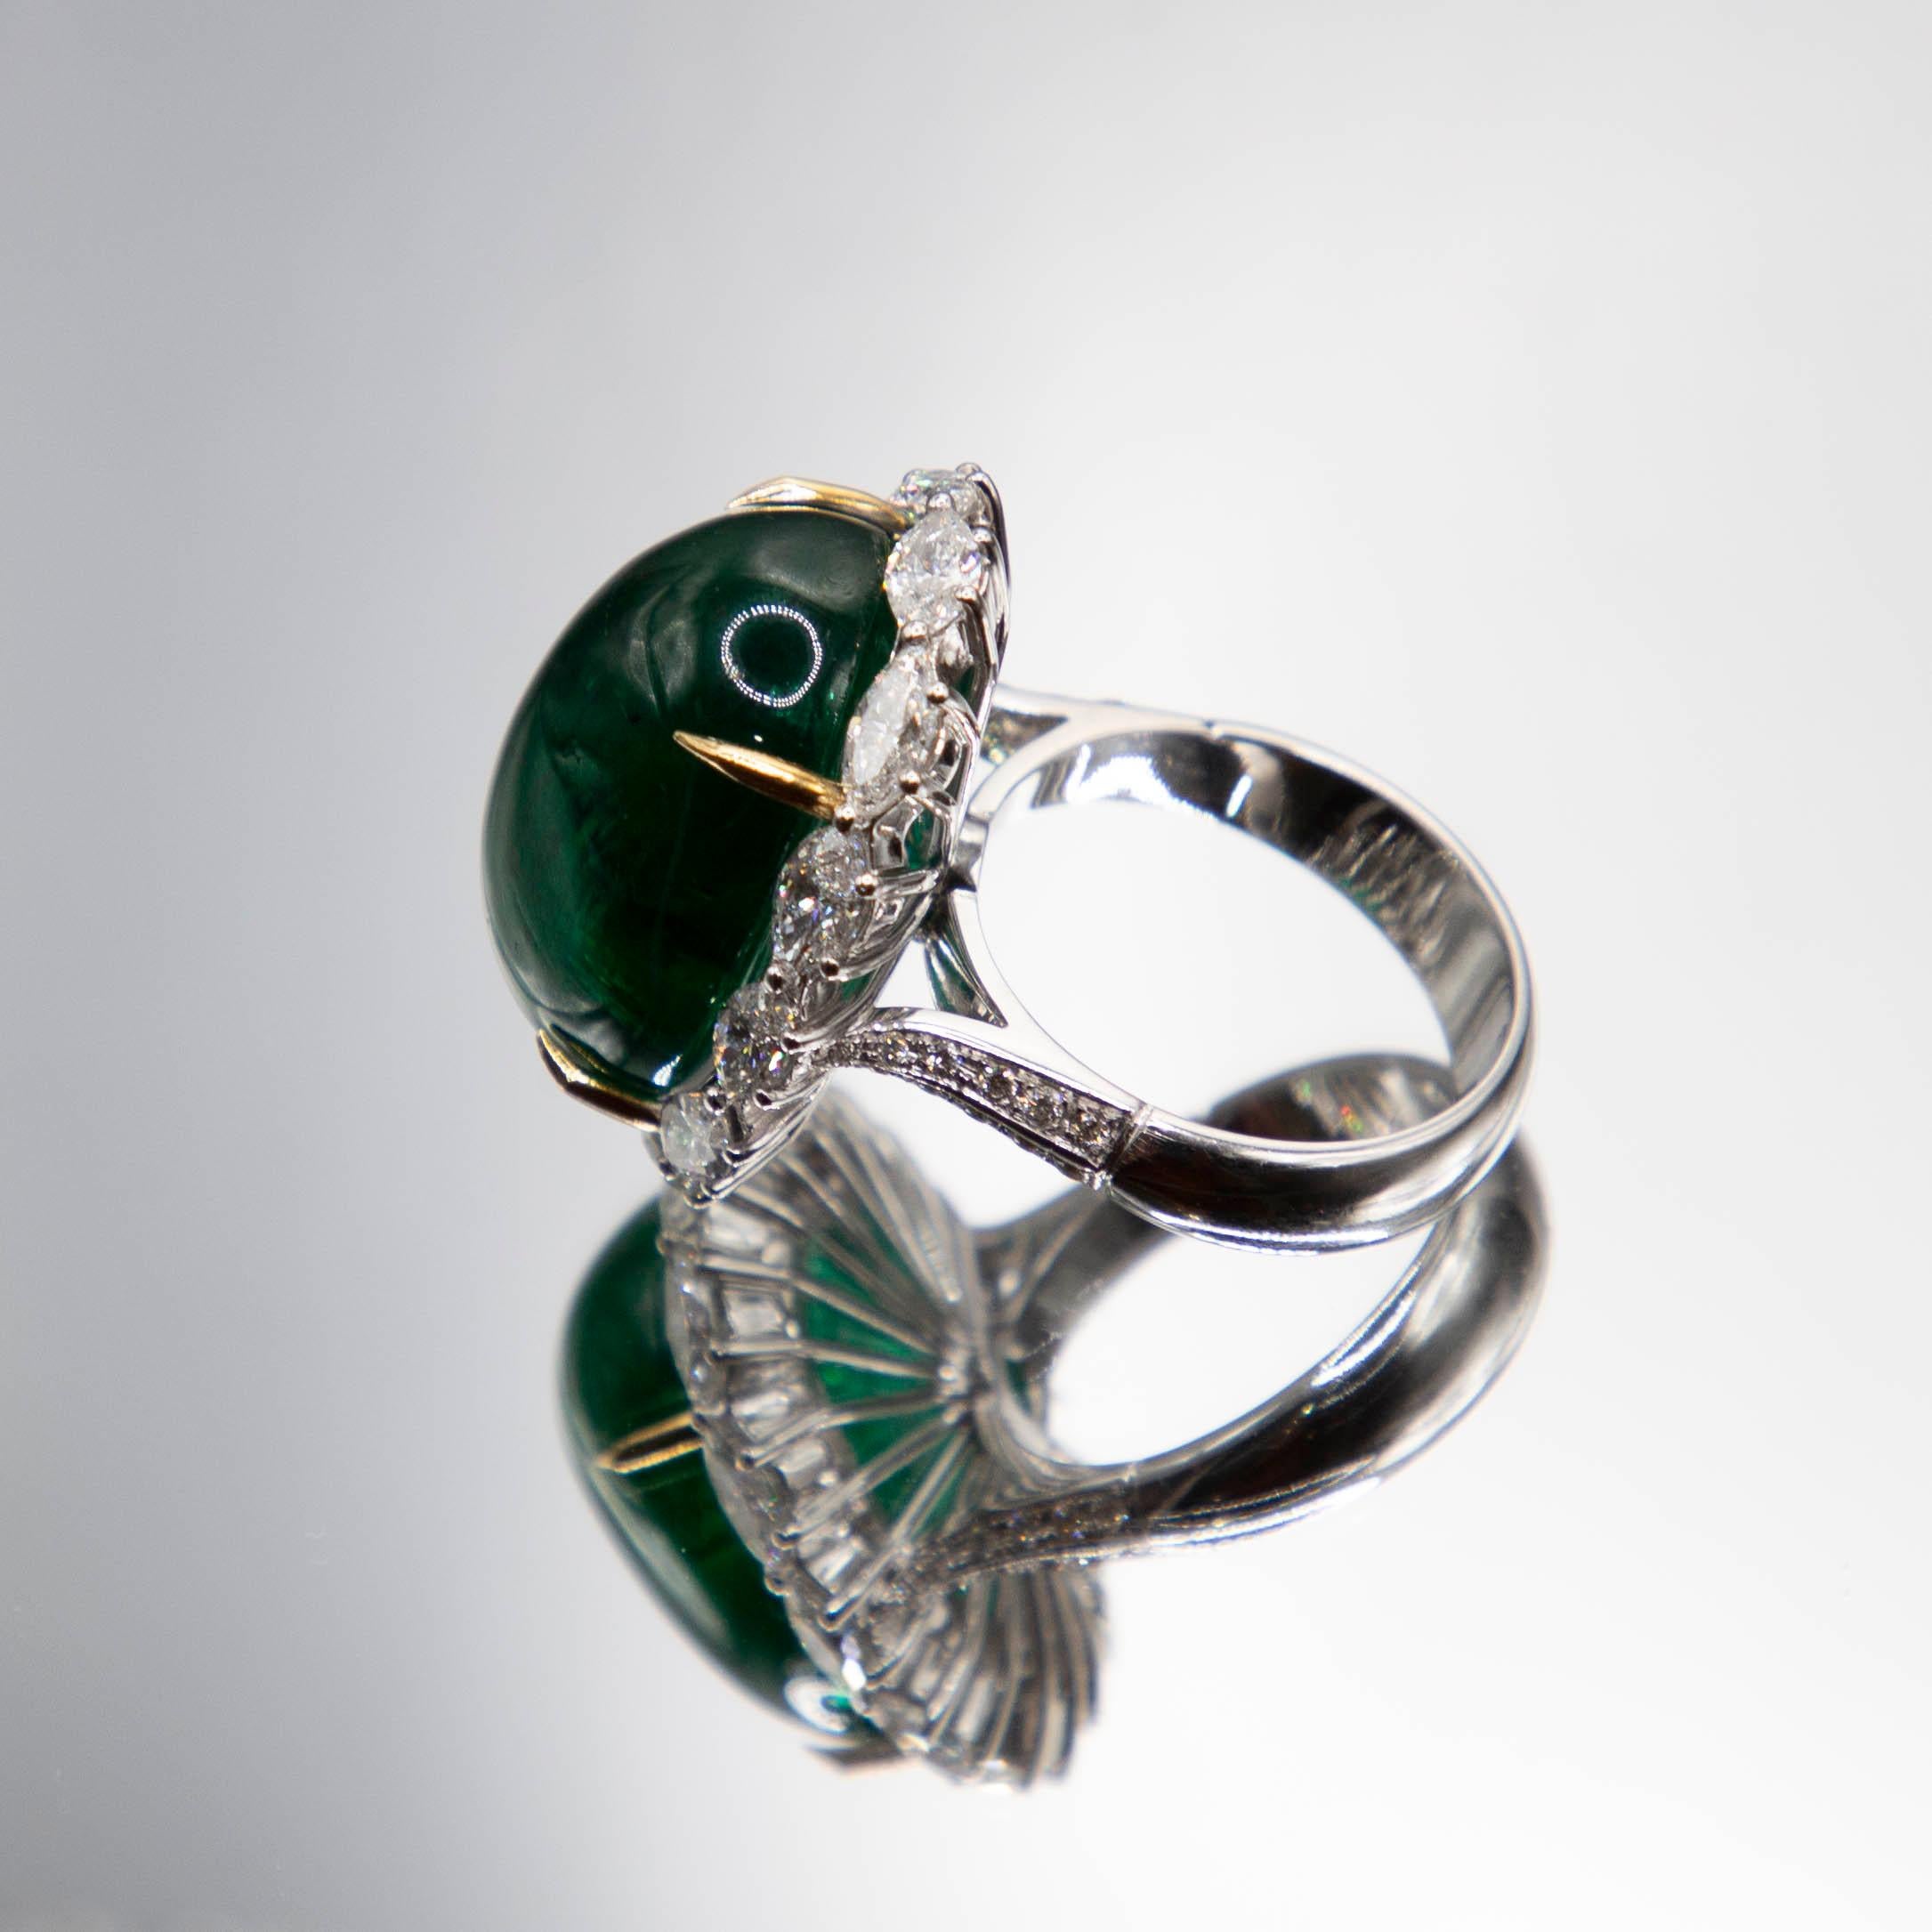 A rare and intense deep green 27.85 carat Zambian emerald displays alluring transparency in a one of a kind 18k white gold, handmade ring. Four talon-style prongs of 18k yellow gold hold the gem securely. Expertly-cut marquise diamonds trace the